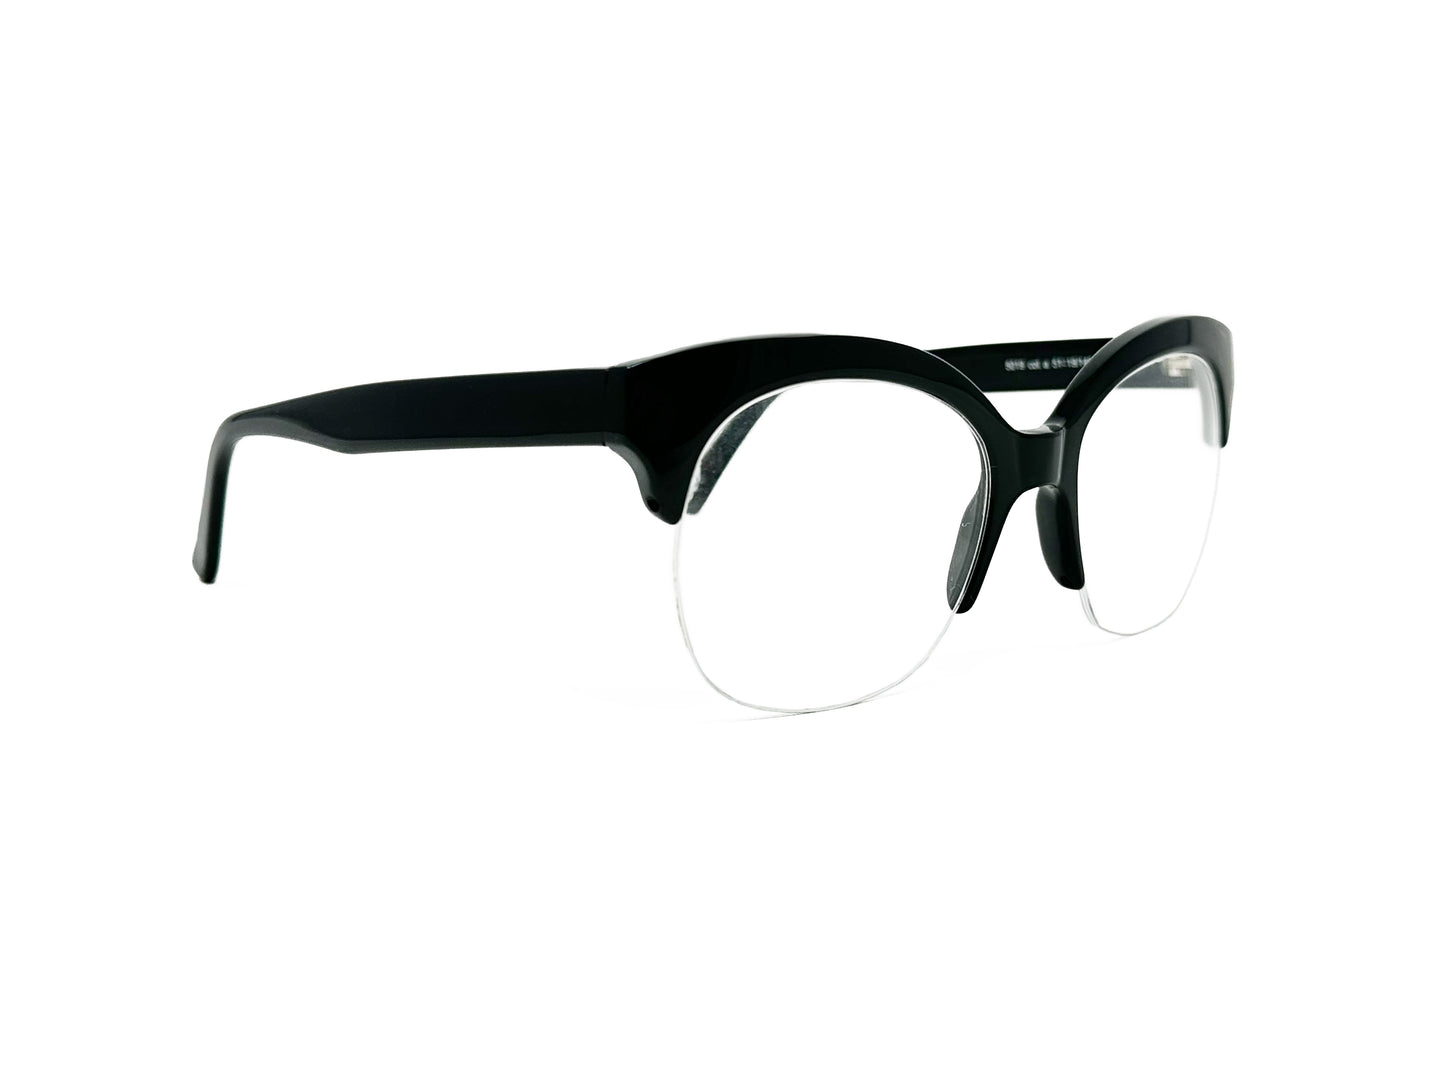 Andy Wolfe uplifted, rounded, half-rim, acetate optical frame. Model: 5019. Color: A - Black. Side view.